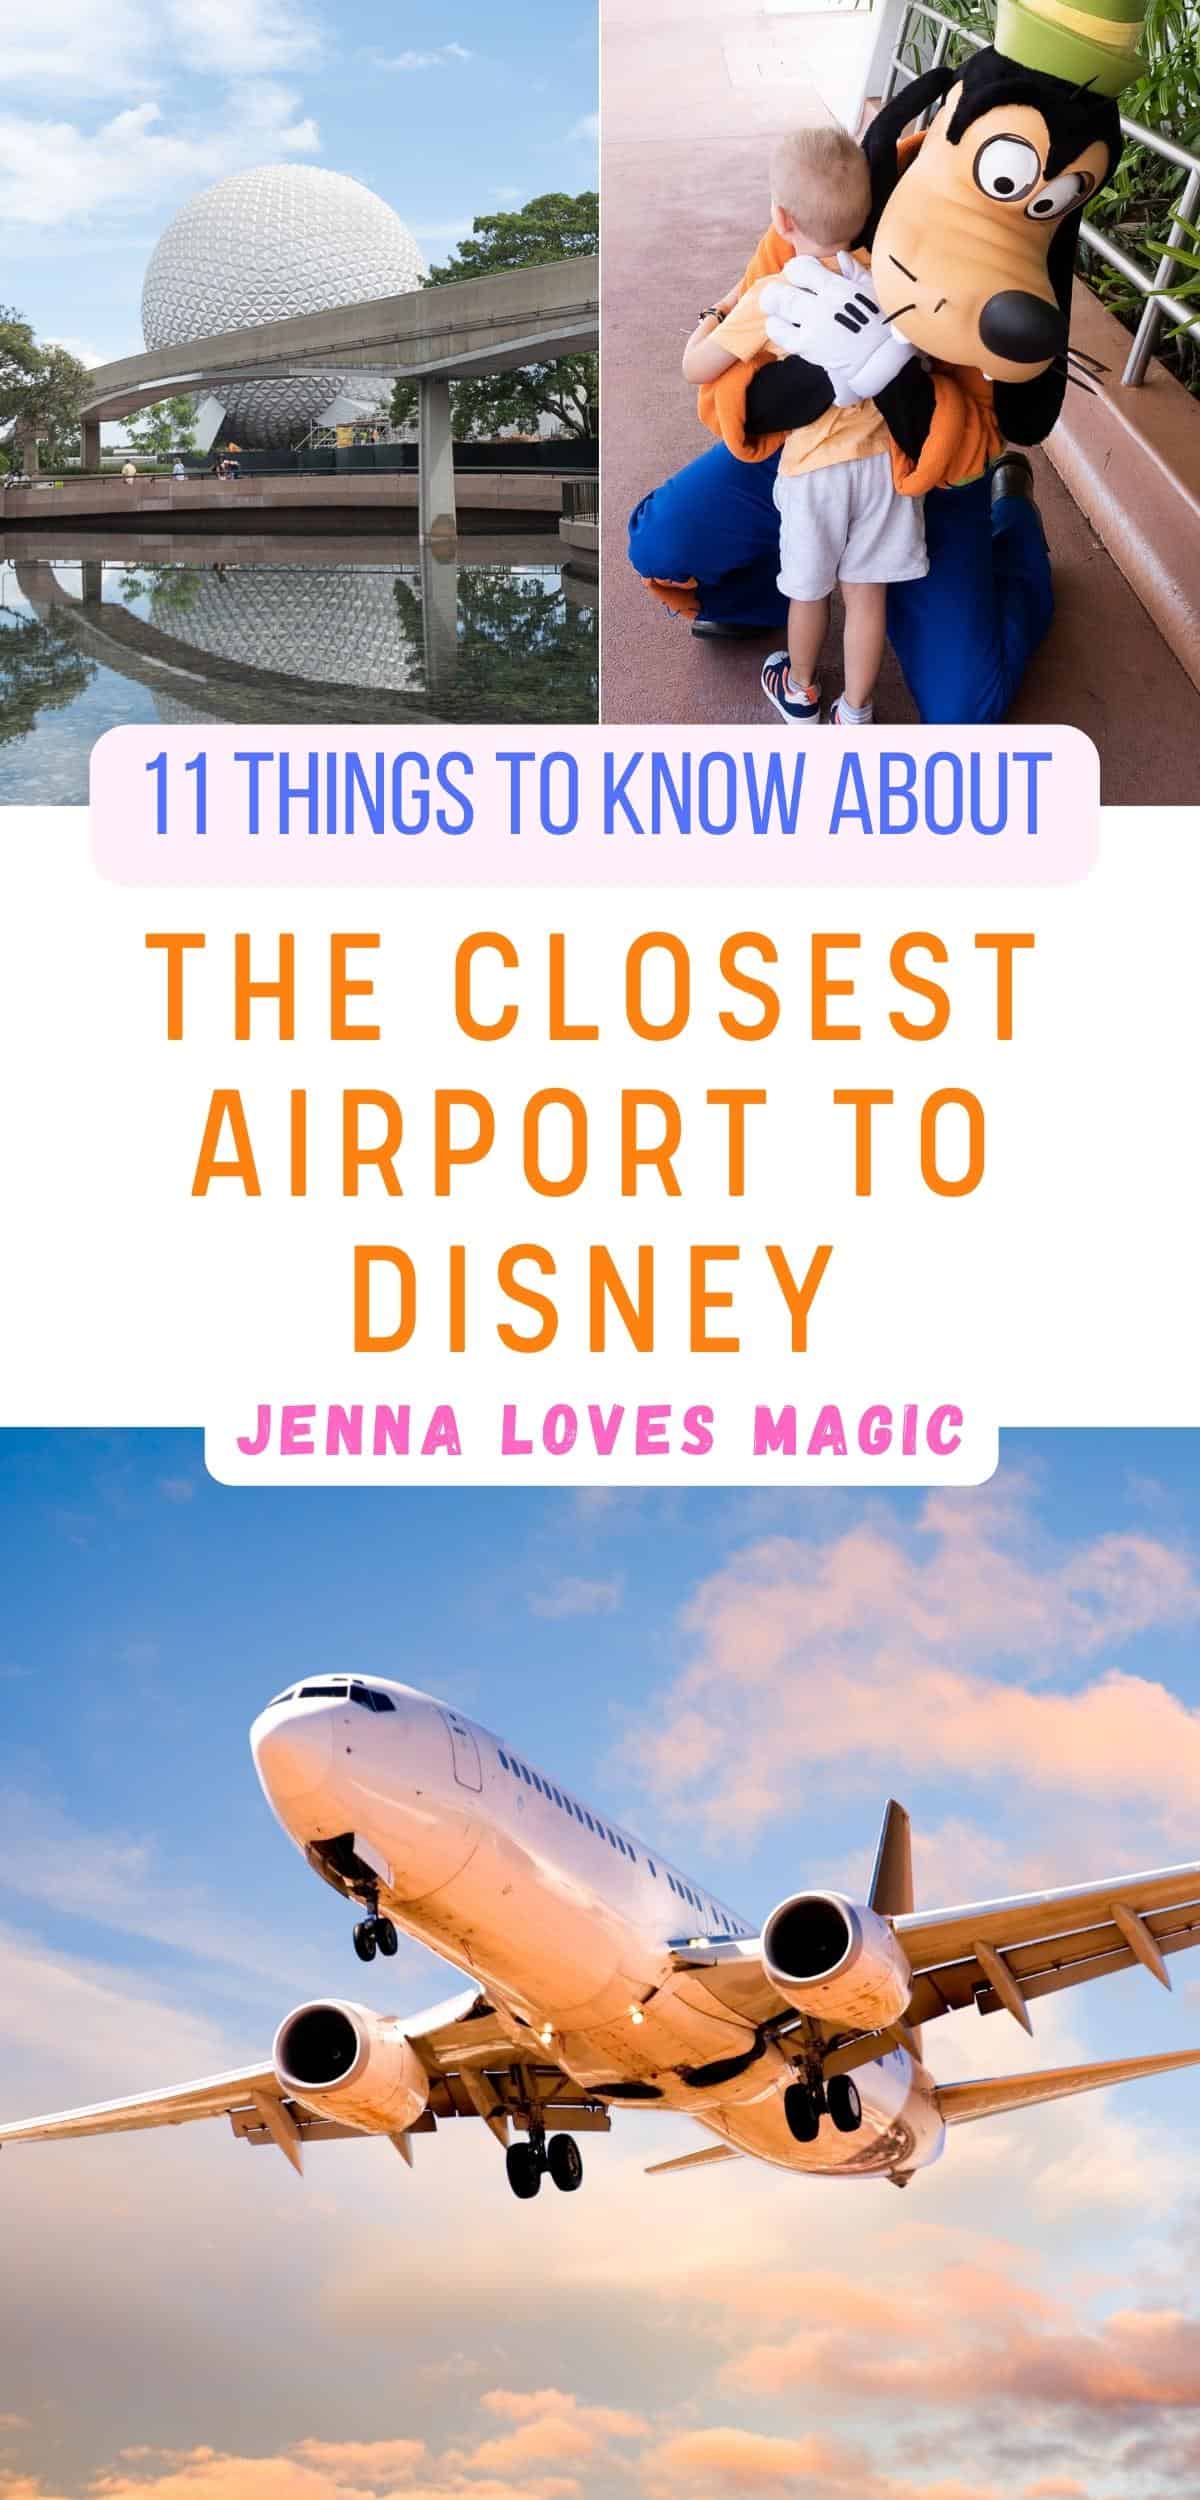 Disney World travel photos with text overlay showing what to know before flying to disney world airport MCO with logo from Jenna Loves Magic